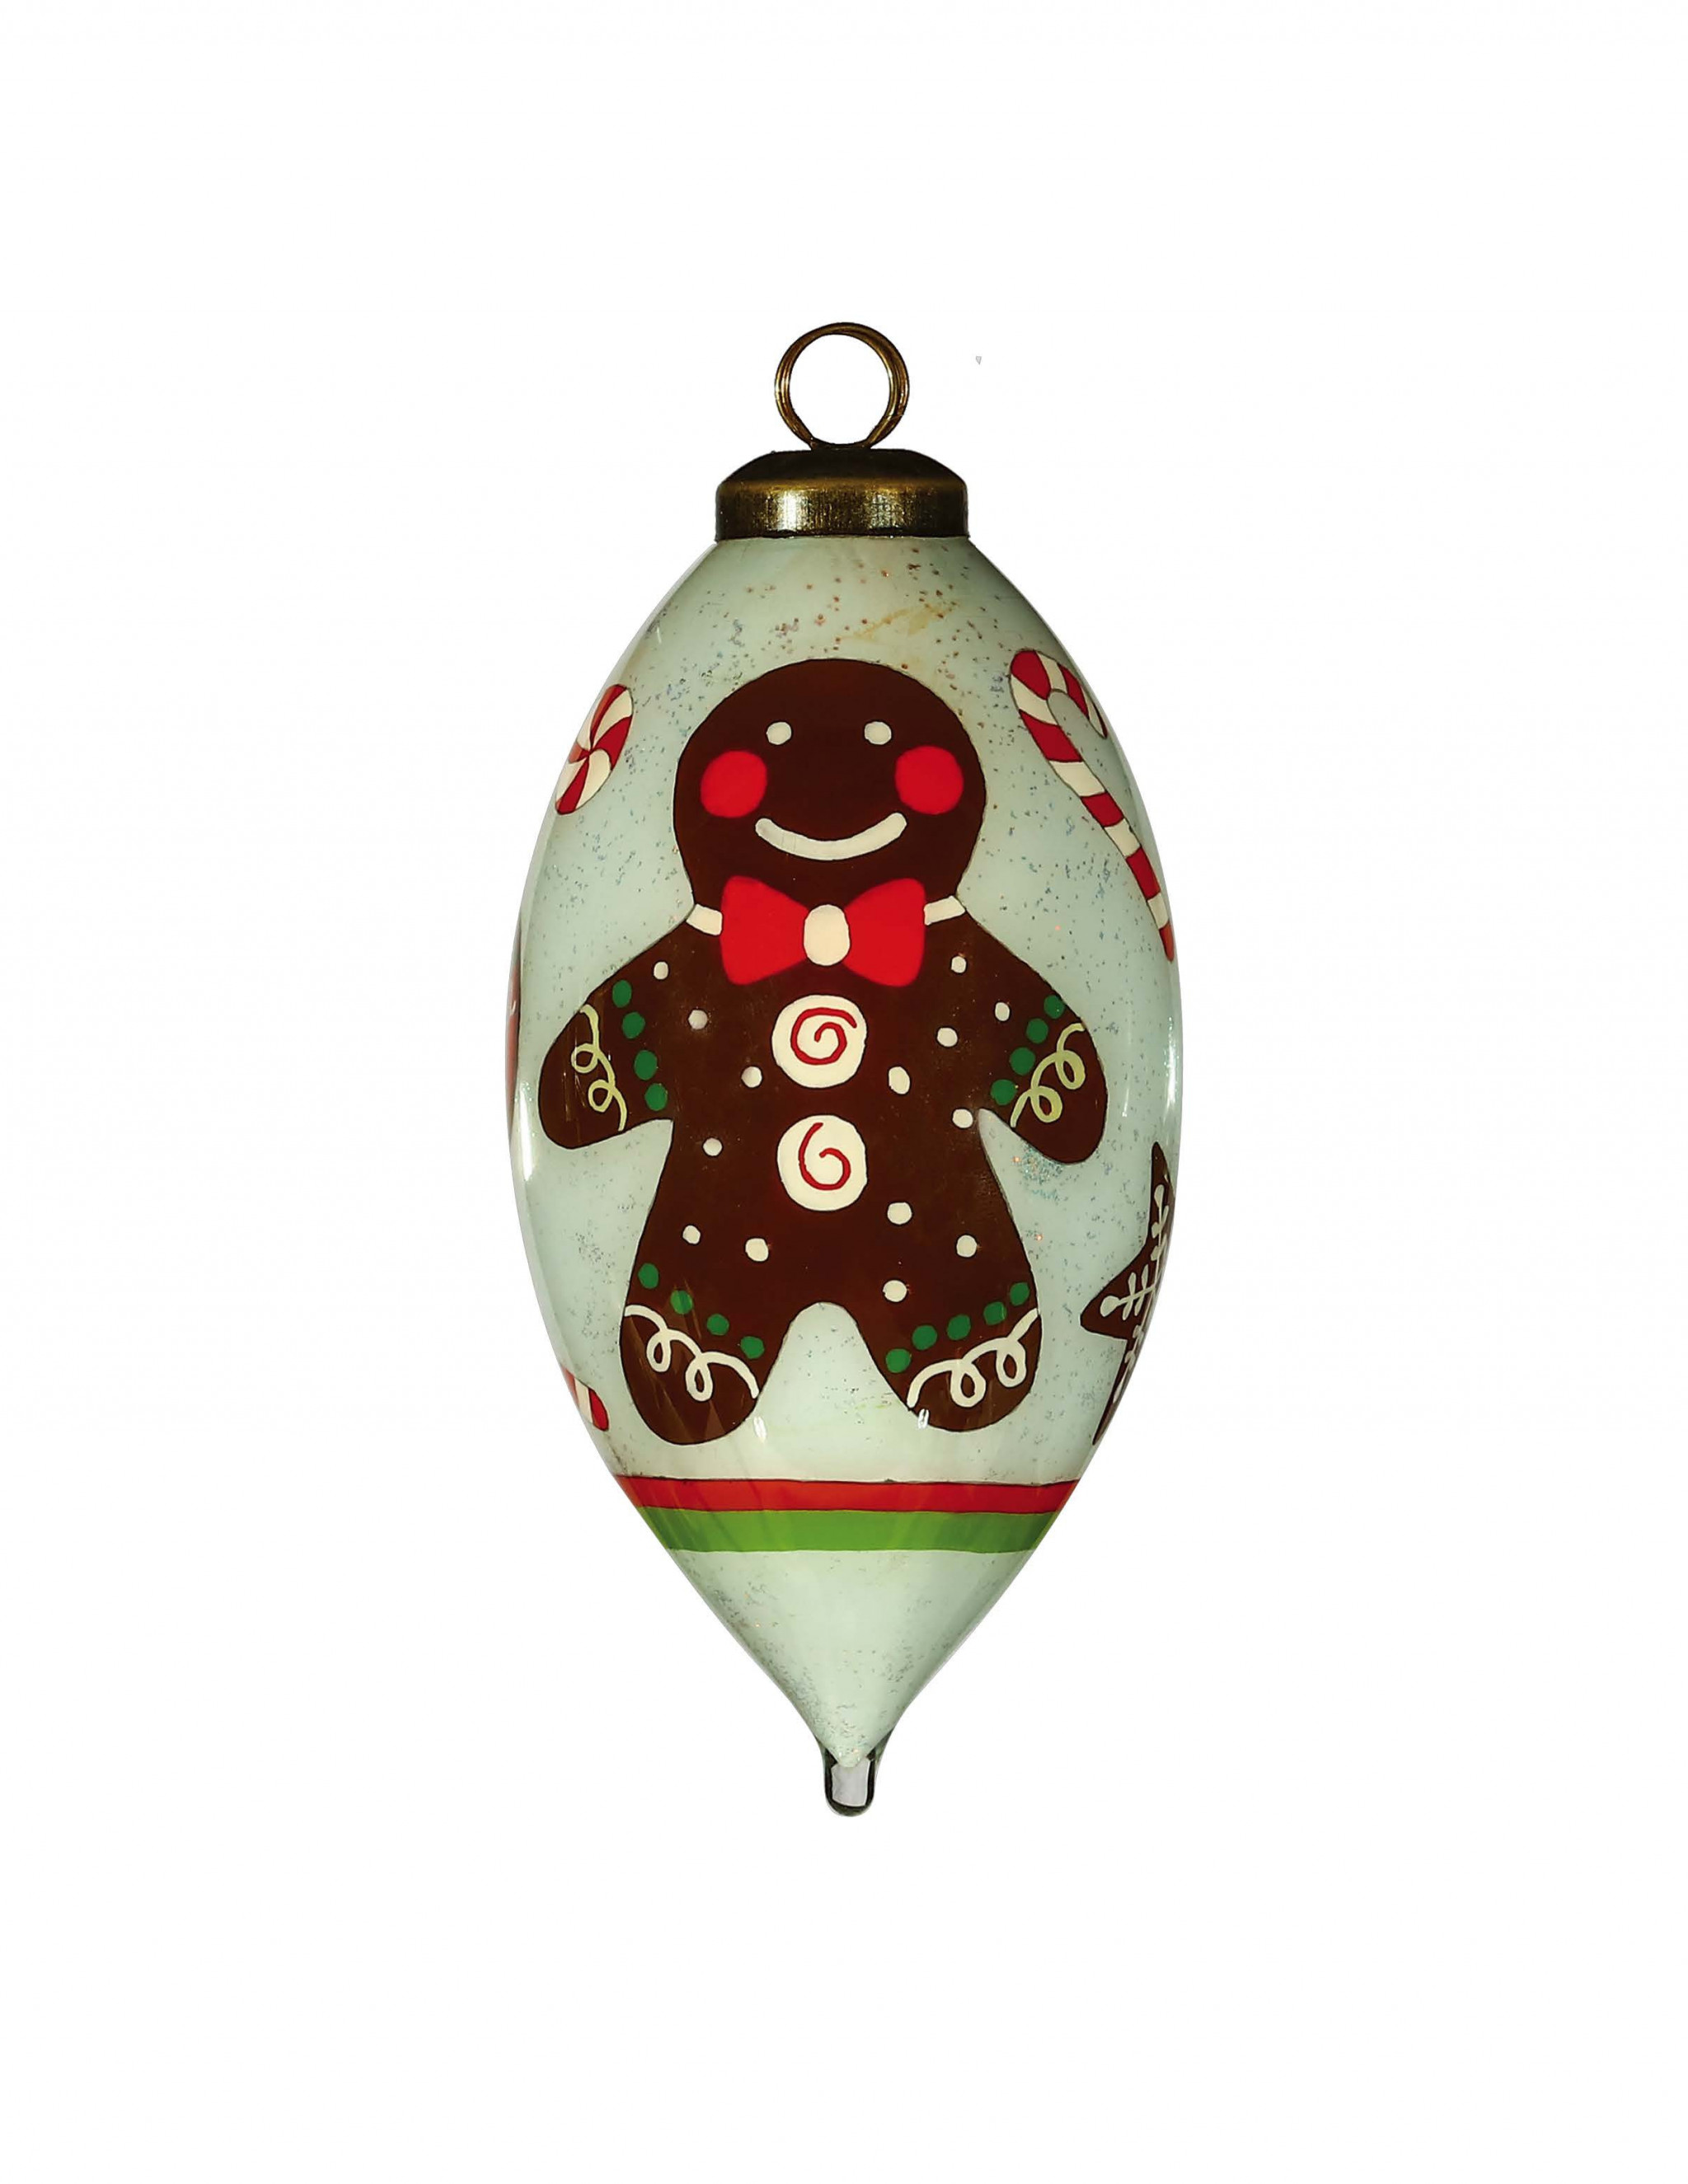 Festive Glitter Gingerbread Man Hand Painted Mouth Blown Glass Ornament